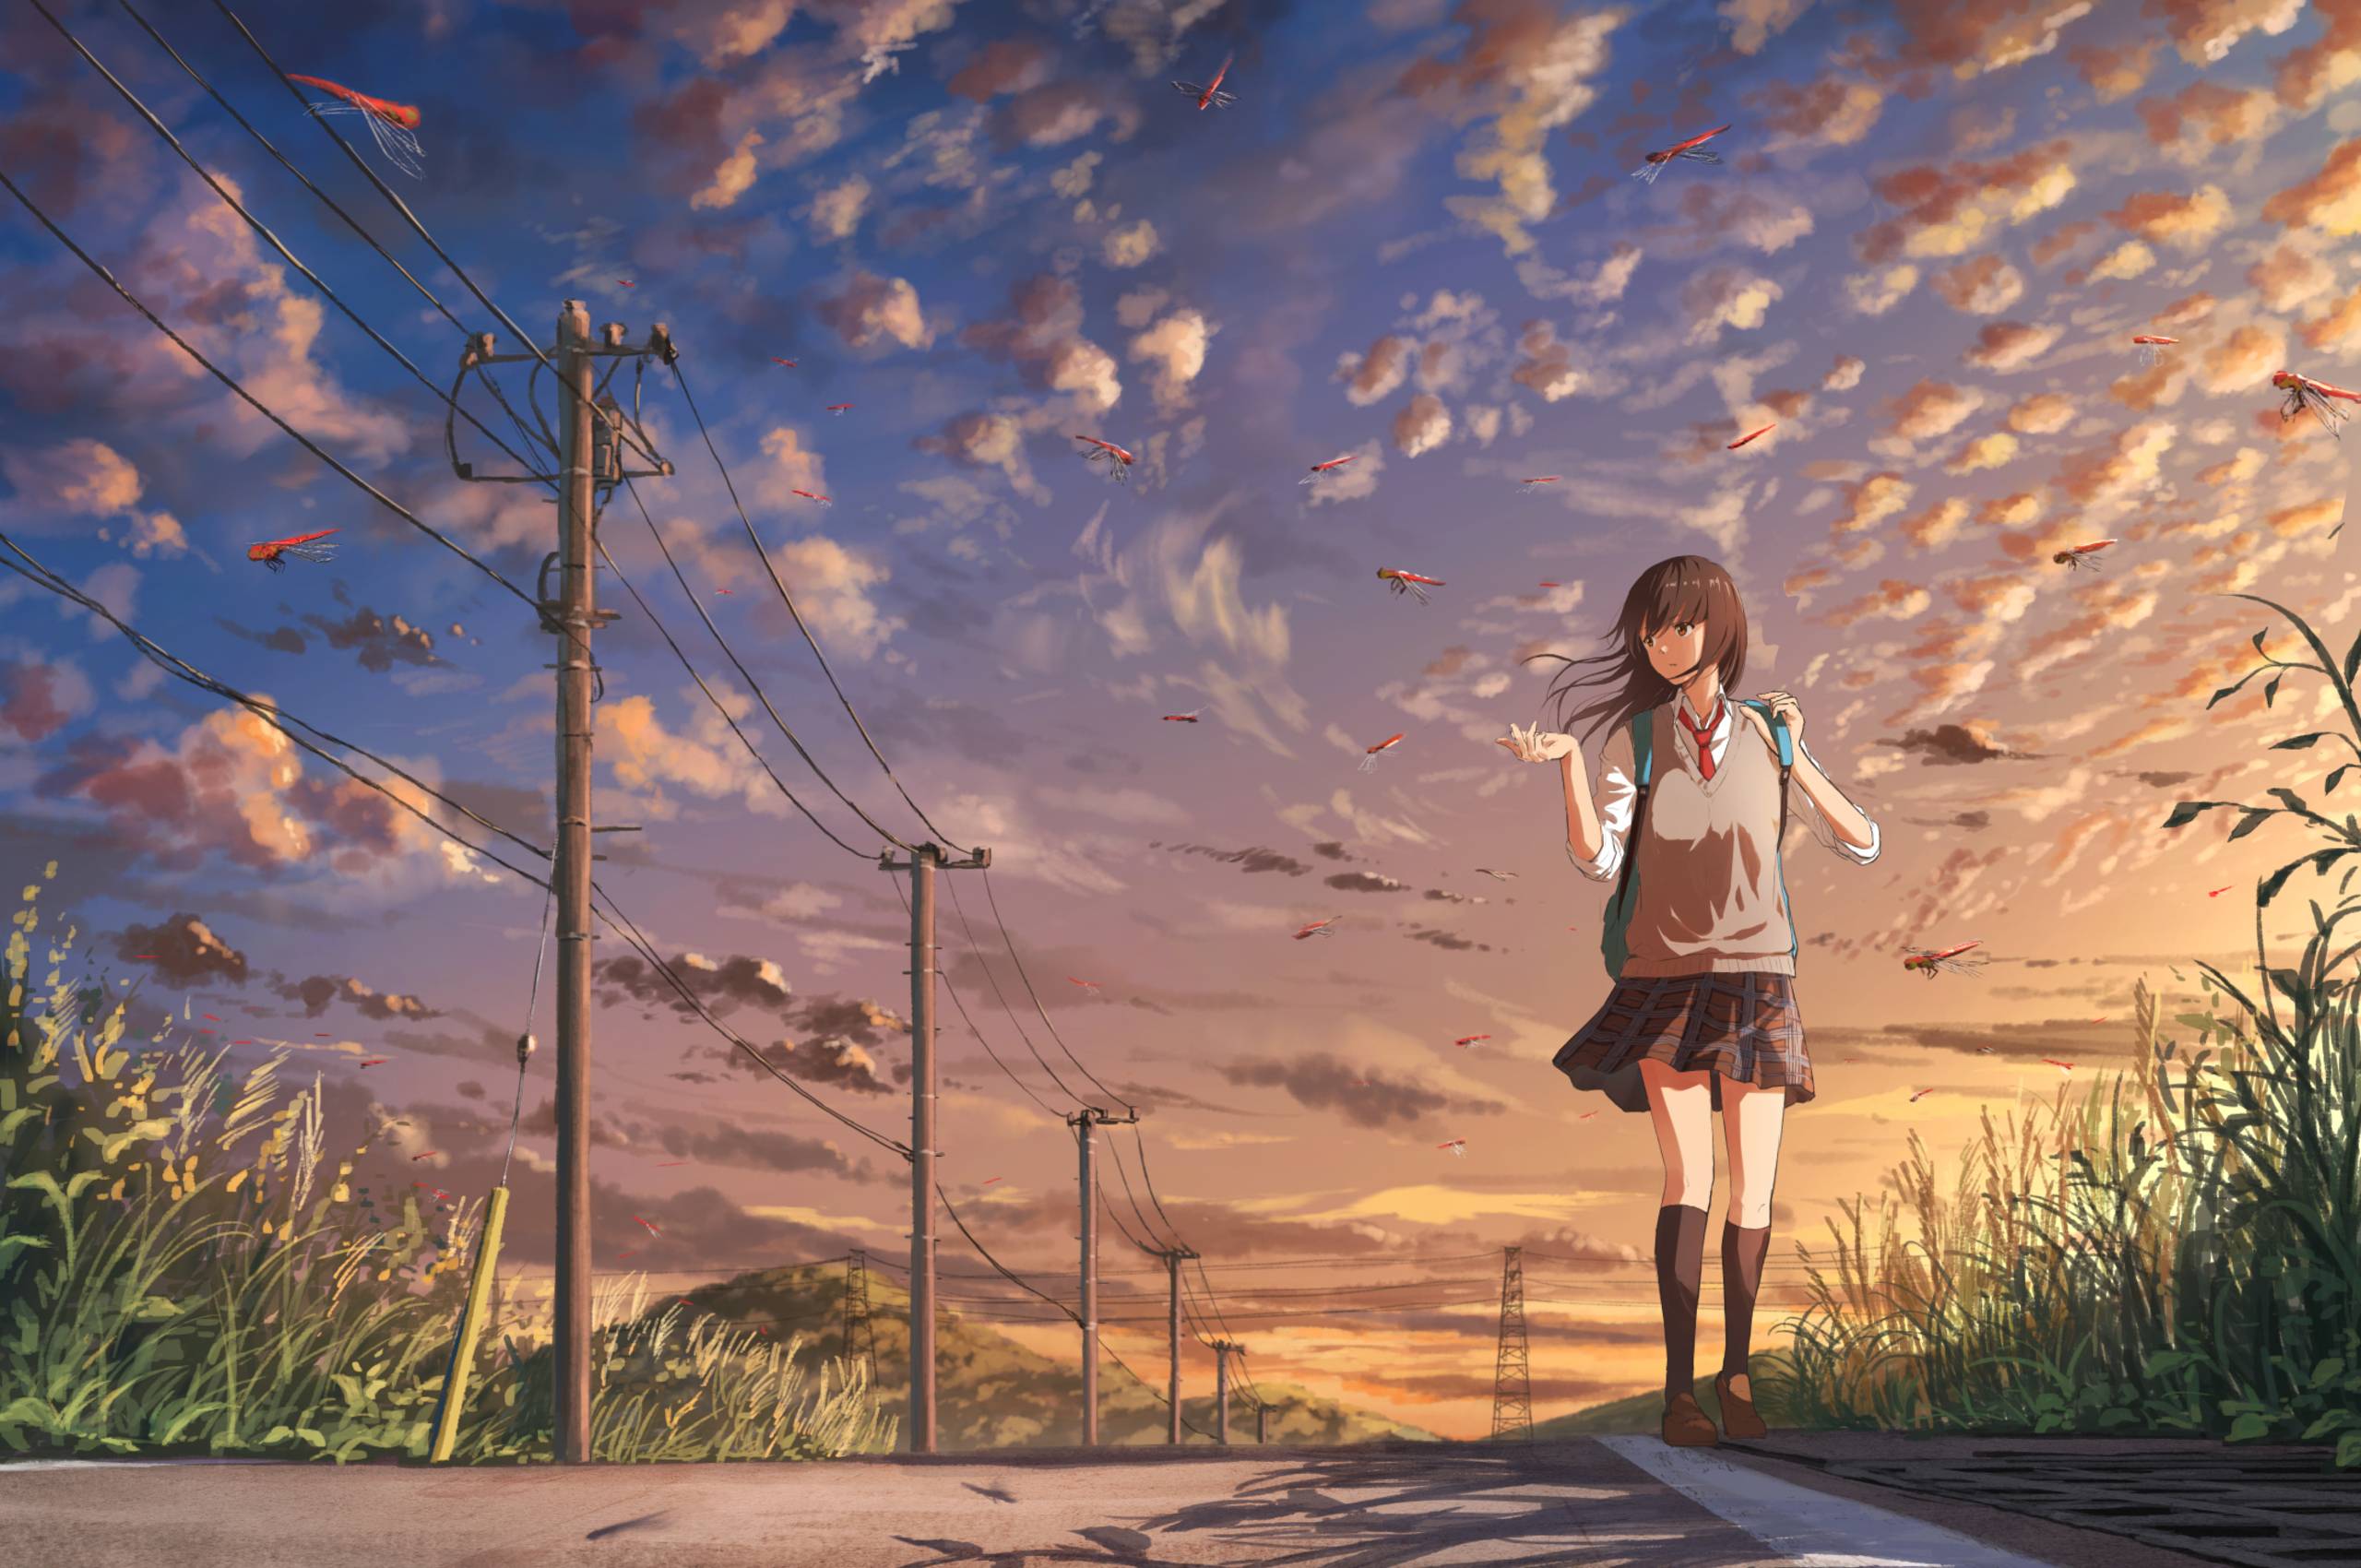 Anime girl standing on the road with a backpack - Chromebook, school